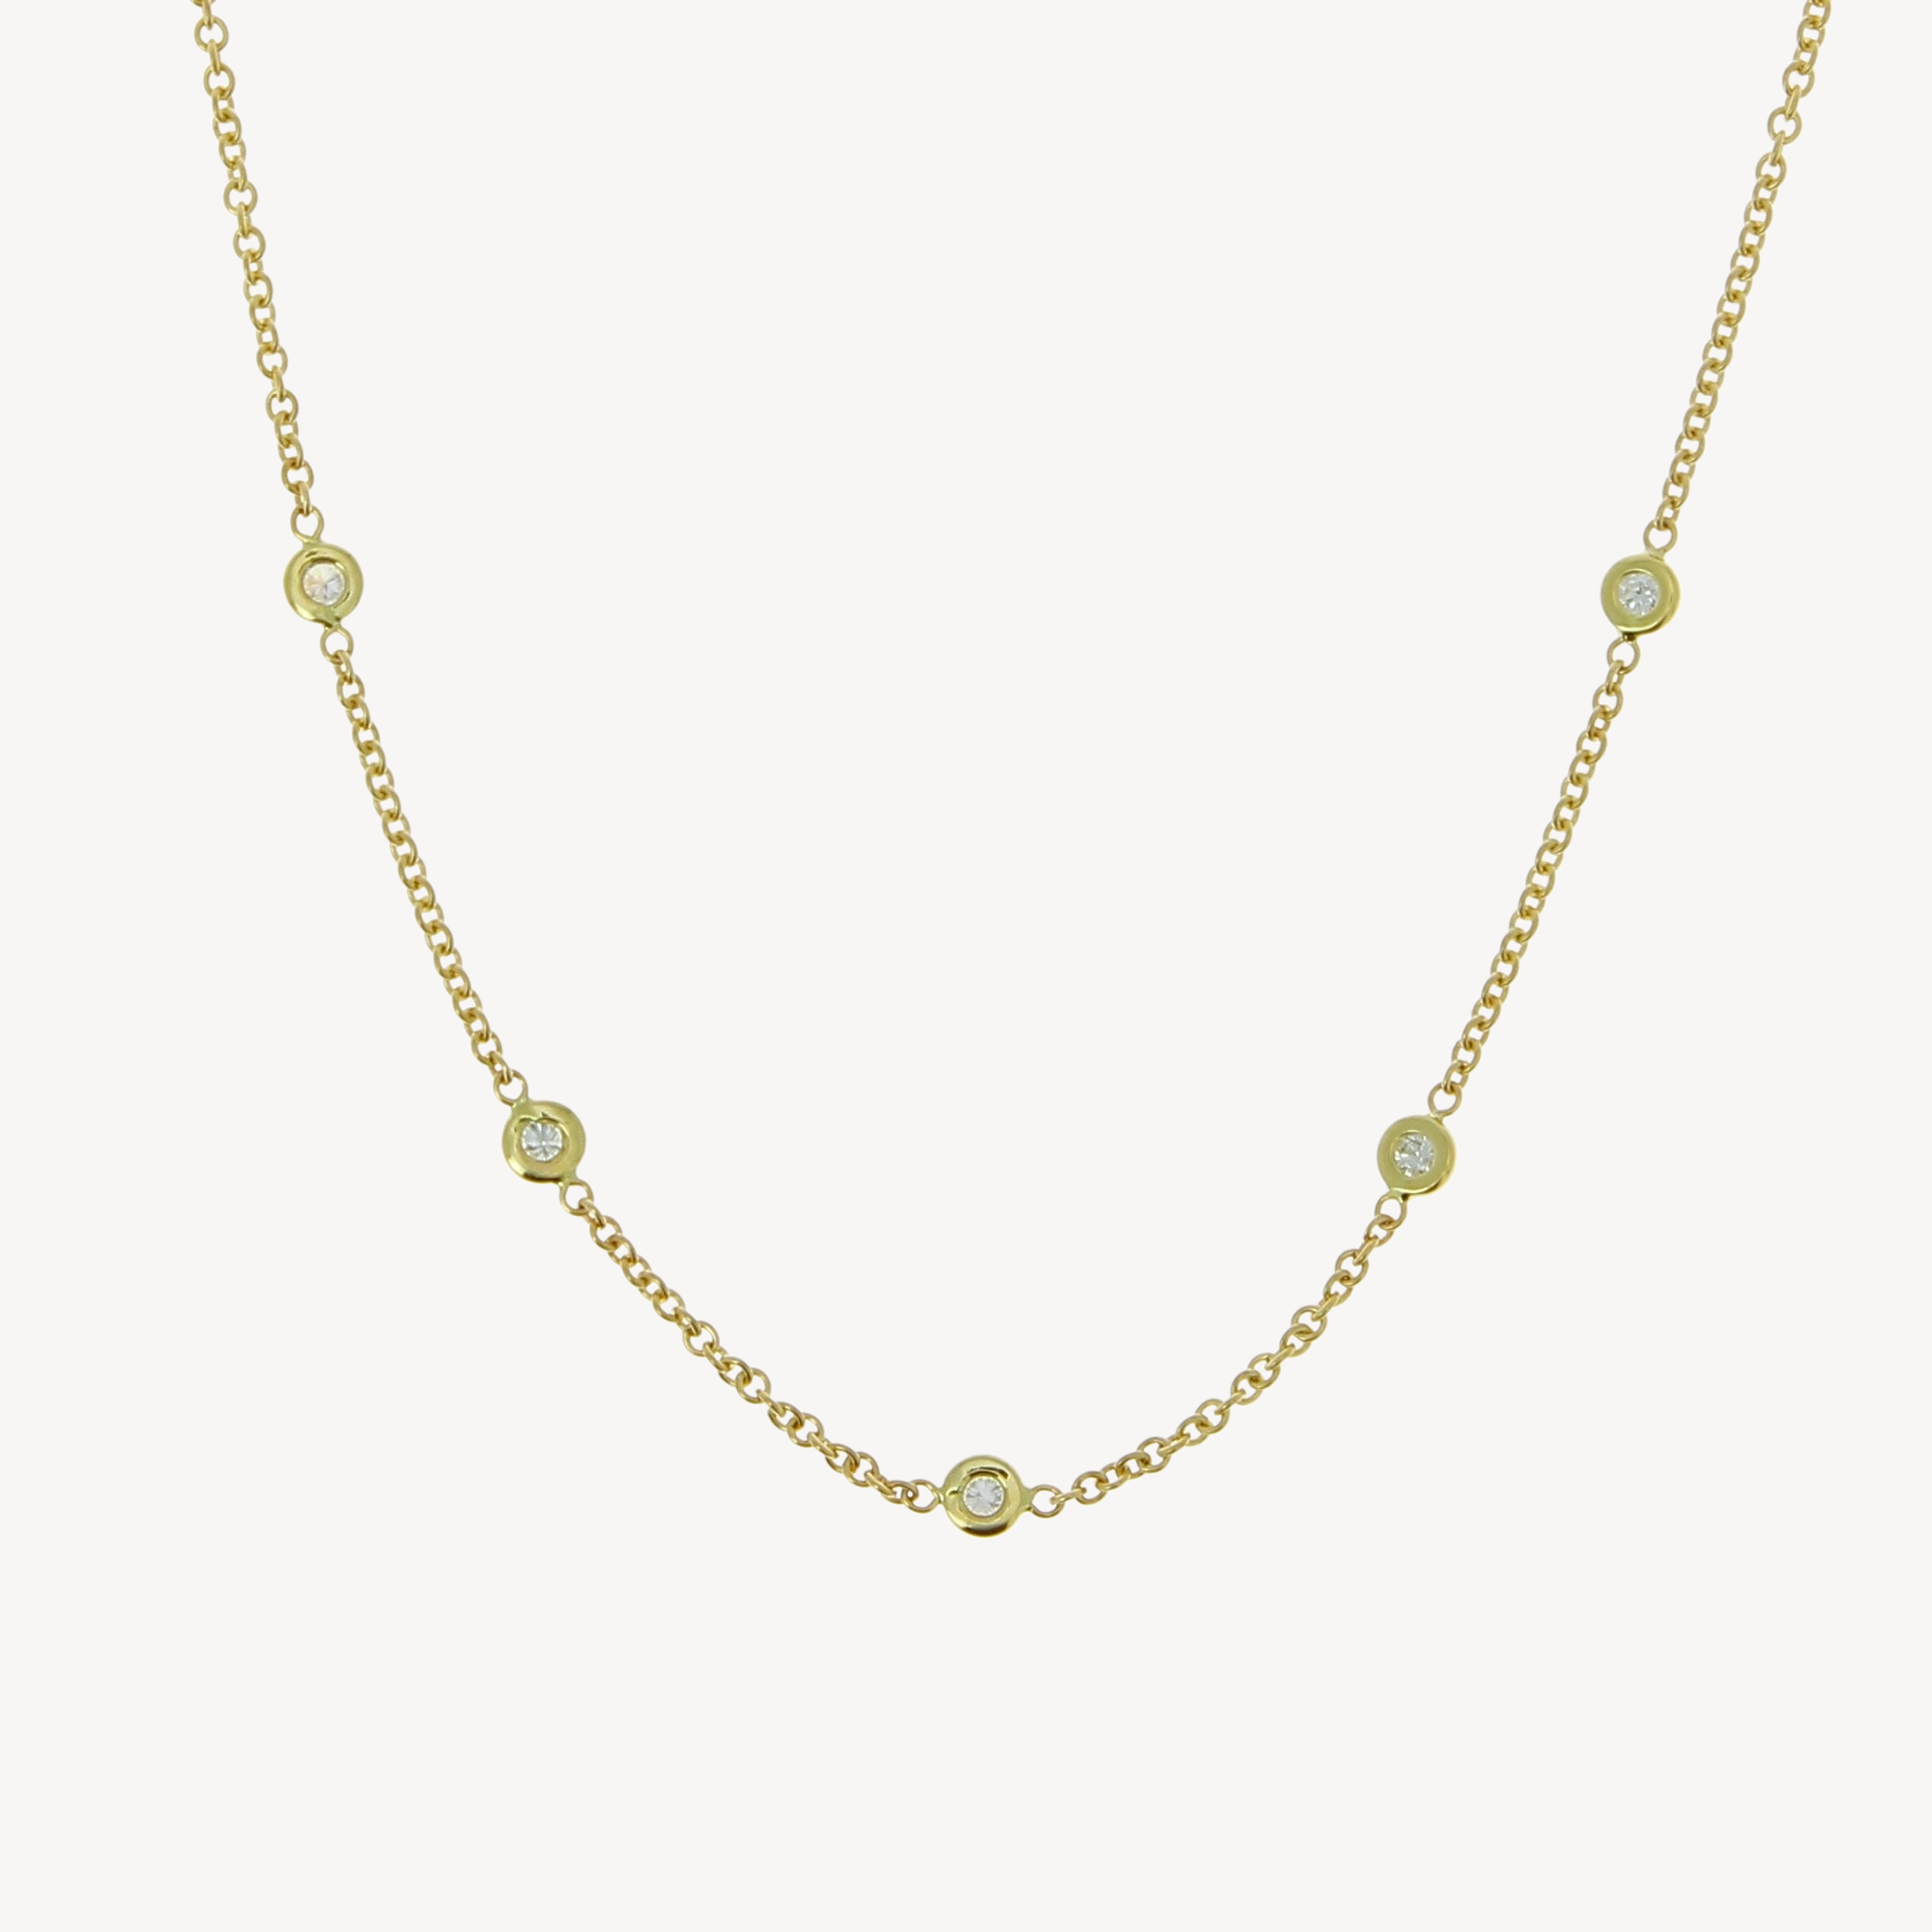 5 spaced out diamond necklace